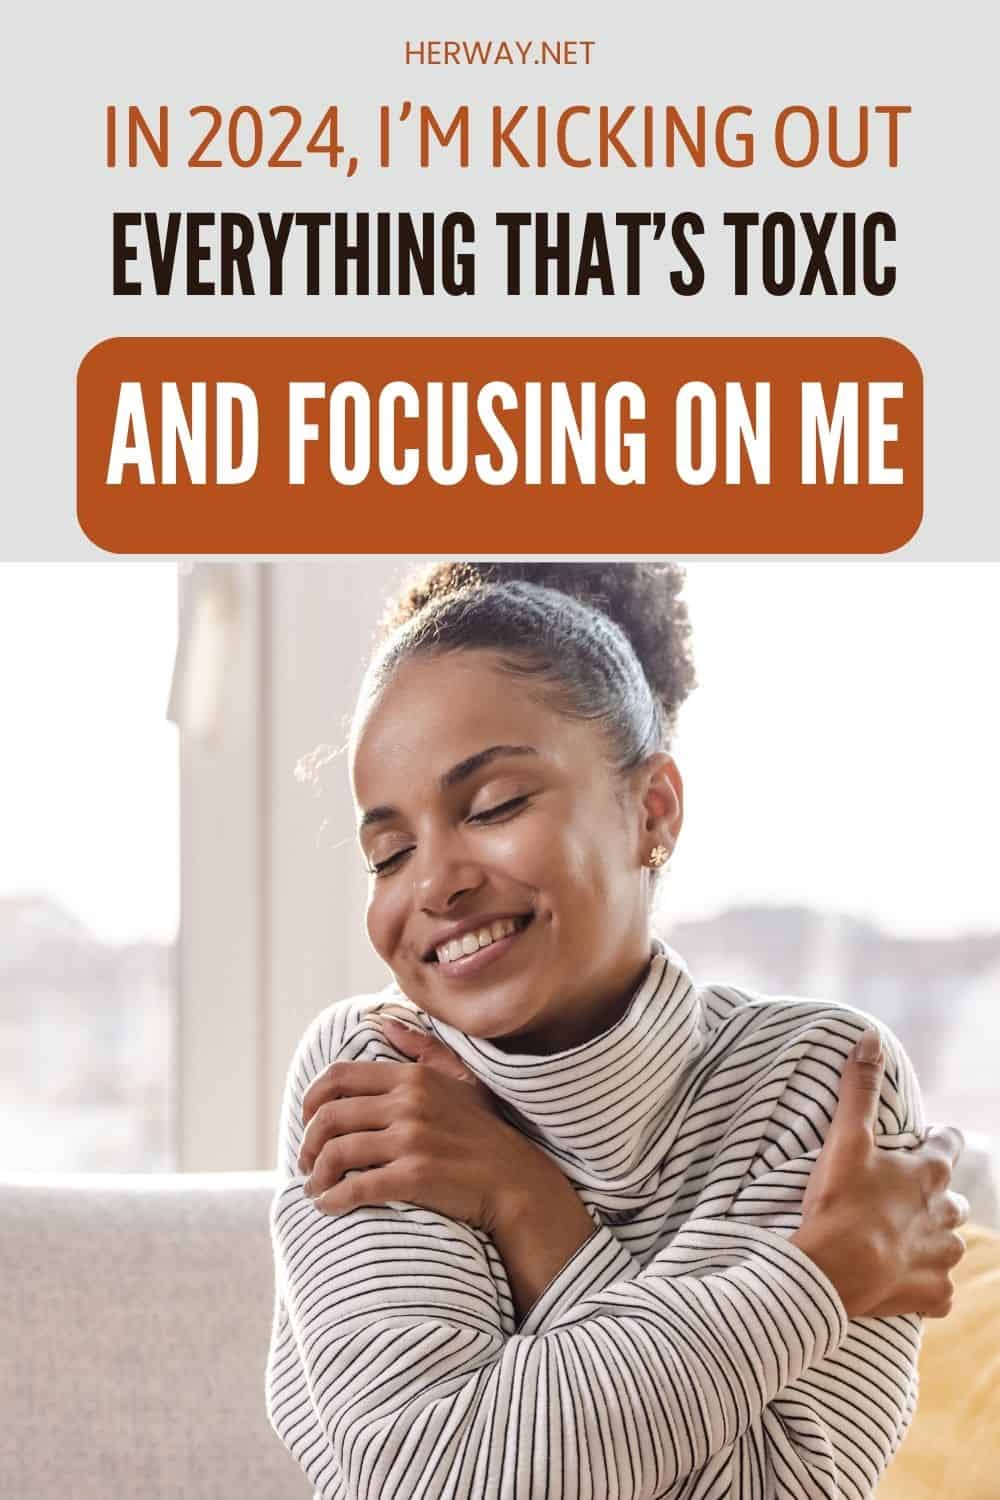 In 2024, I’m Kicking Out Everything That’s Toxic And Focusing On Me